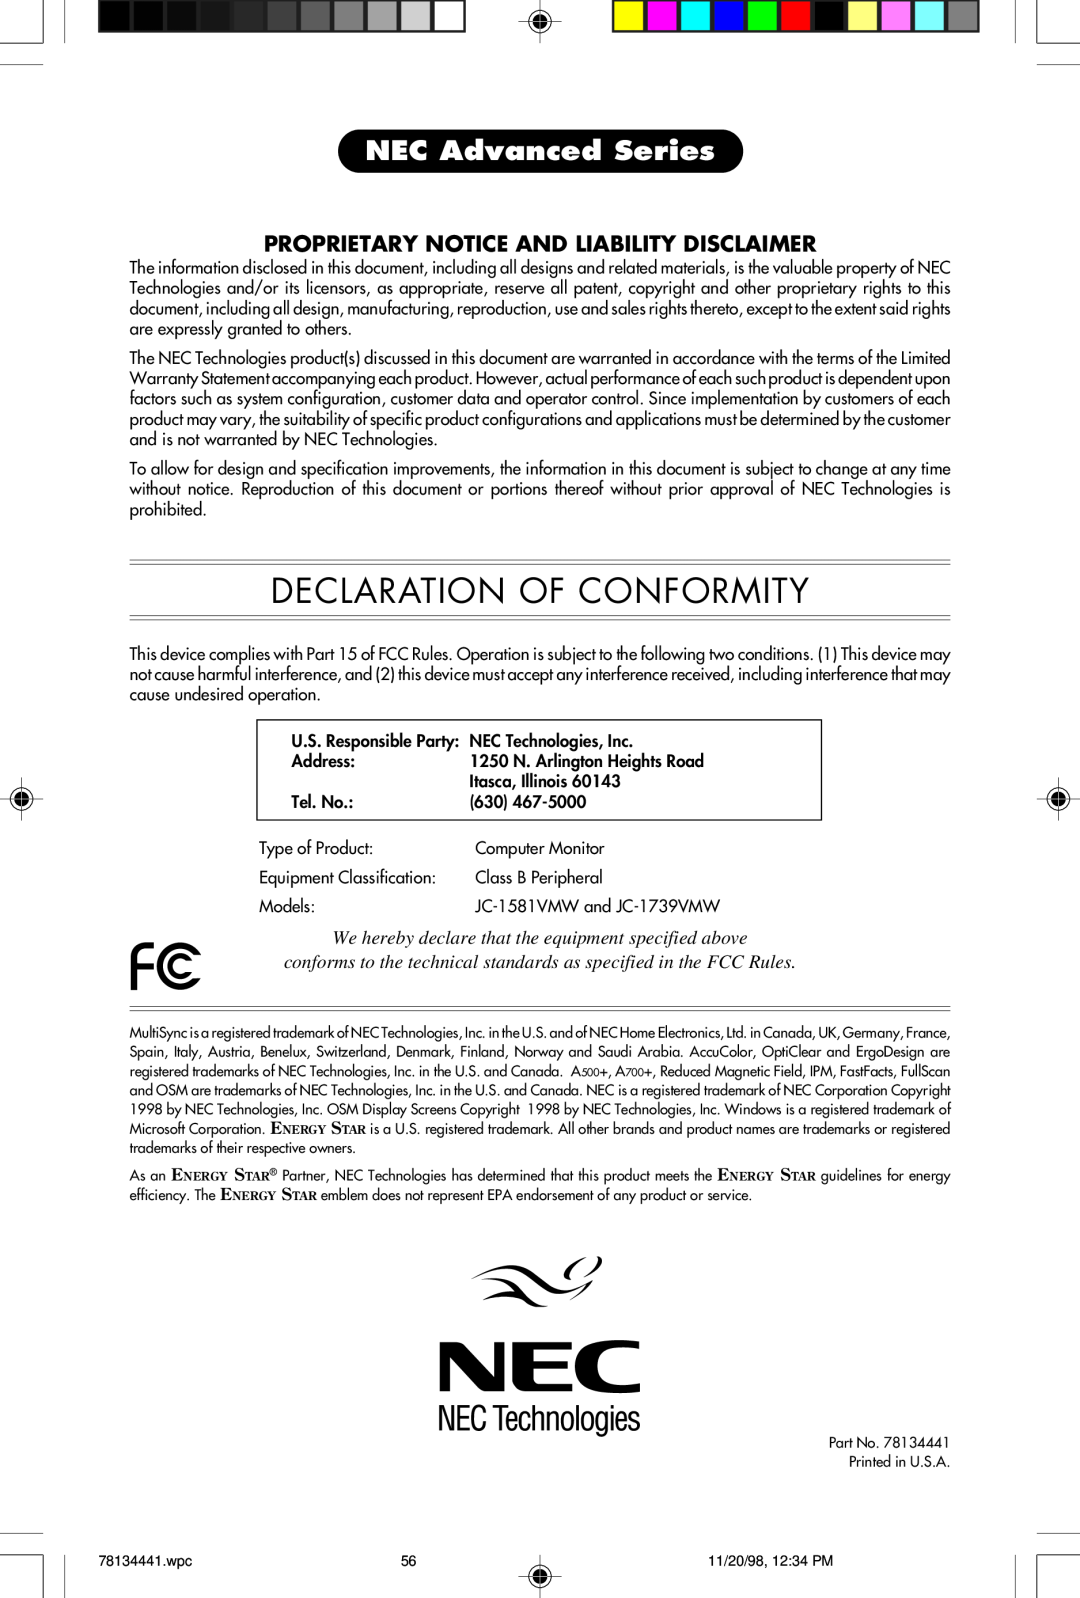 NEC A500+TM, A700+TM user manual Declaration Of Conformity, NEC Advanced Series, Proprietary Notice And Liability Disclaimer 